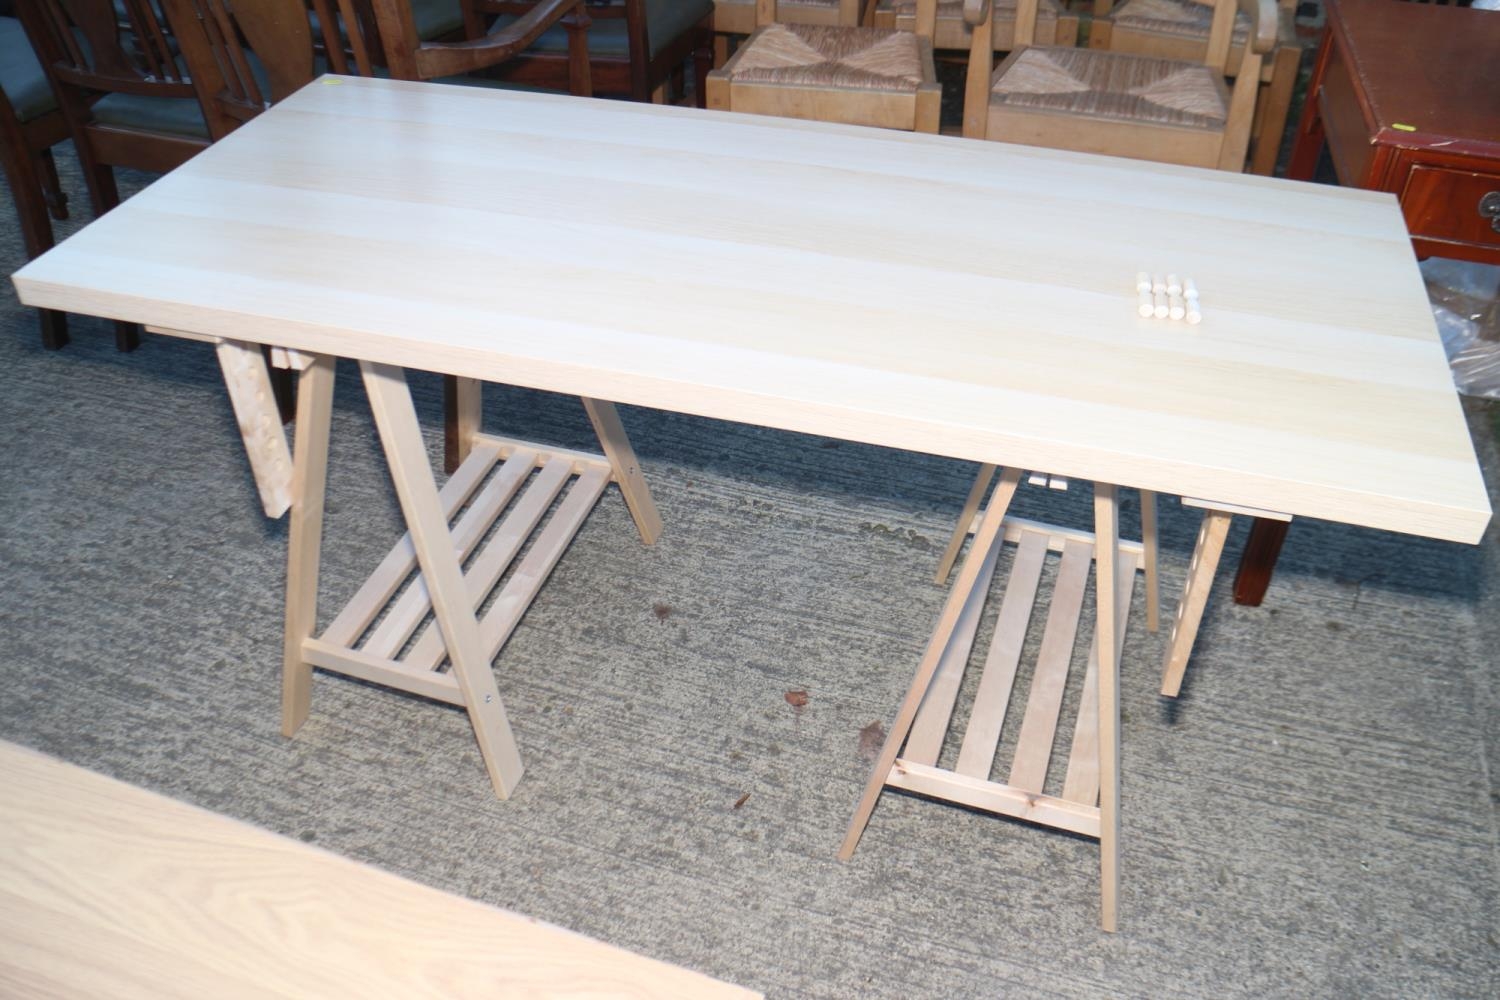 A modern laminate top adjustable height table, on trestle supports, 54" wide x 24" deep x 32" high